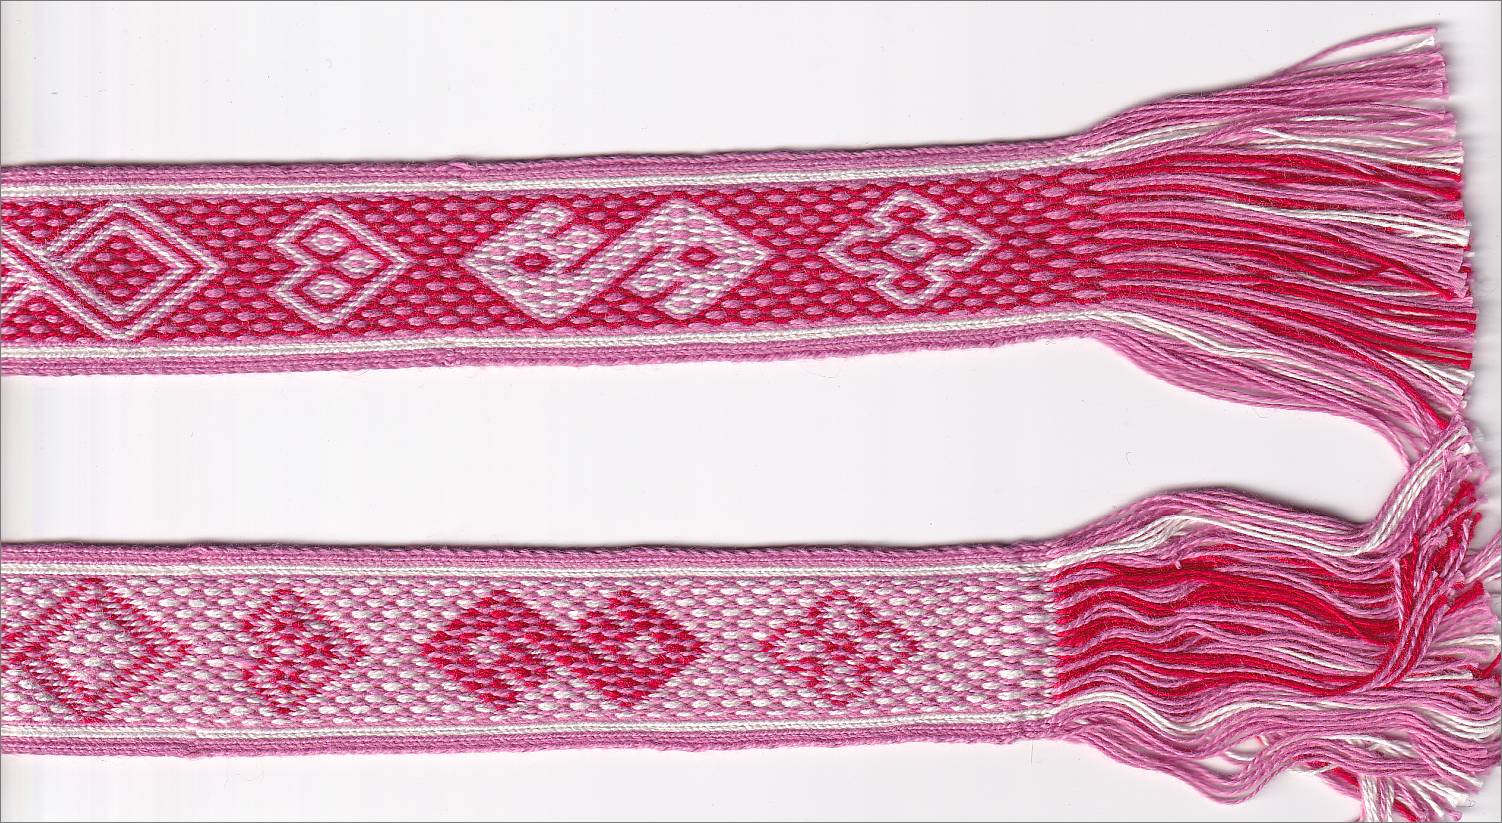 Red Sulawesi tablet woven band.  [Image is:  'Red Sulawesi tablet woven band'].